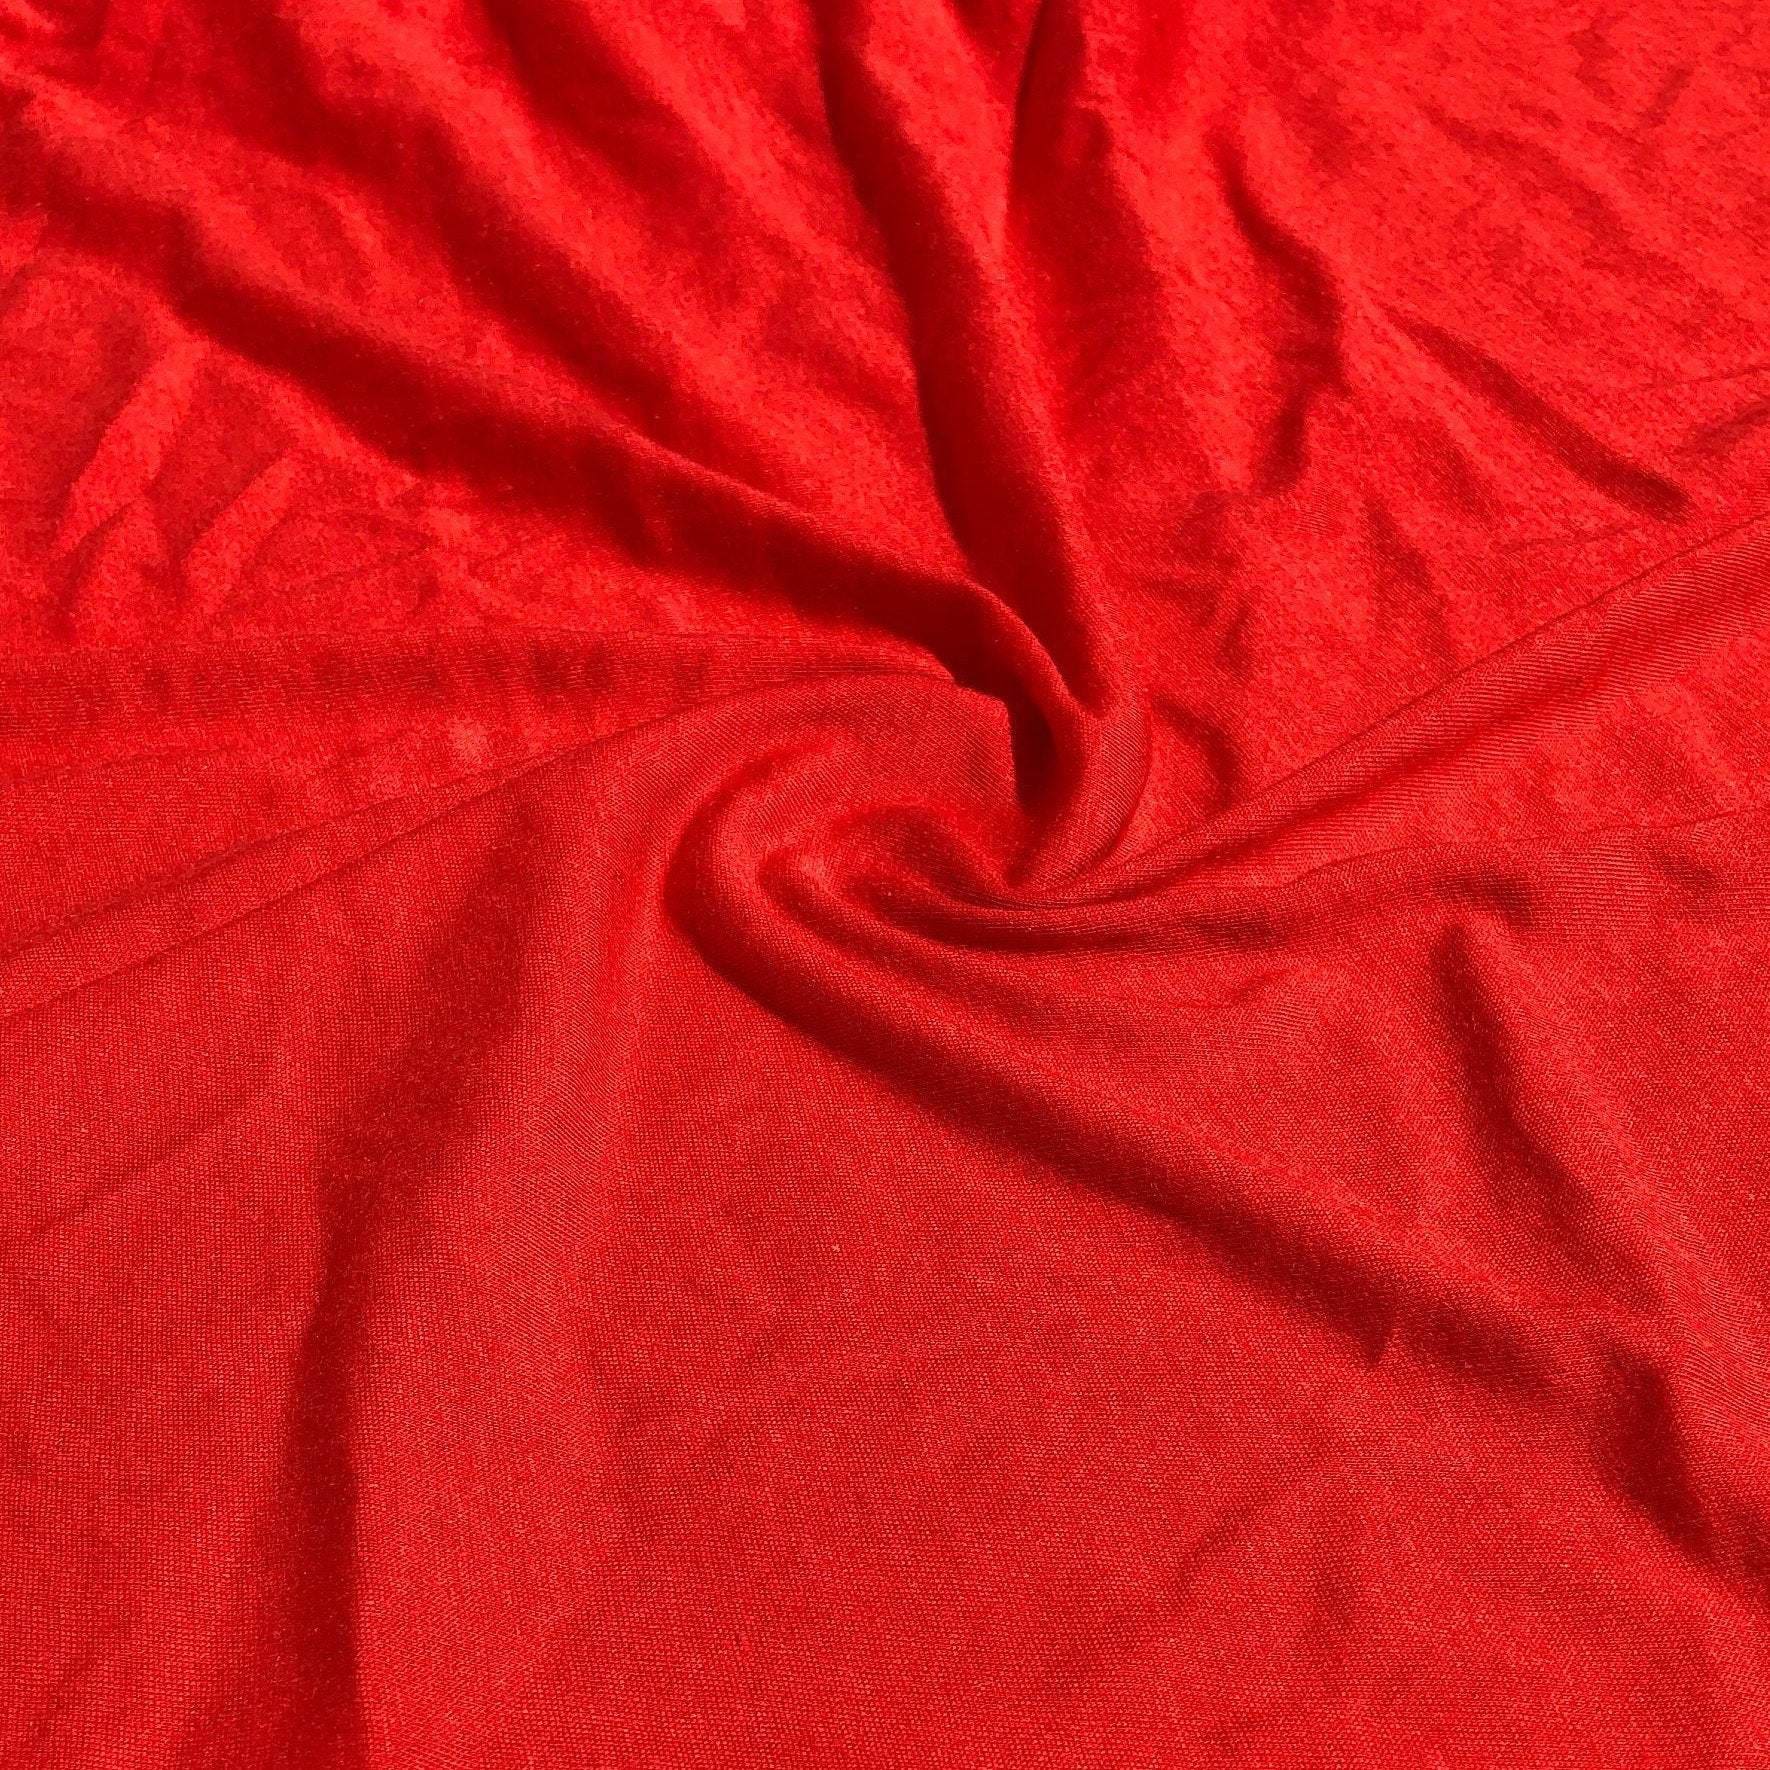 Mandel Fabrics LLC Red 100% Nylon Net 70/72 Wide Sewing and Craft Fabric,  Sold by the Yard.